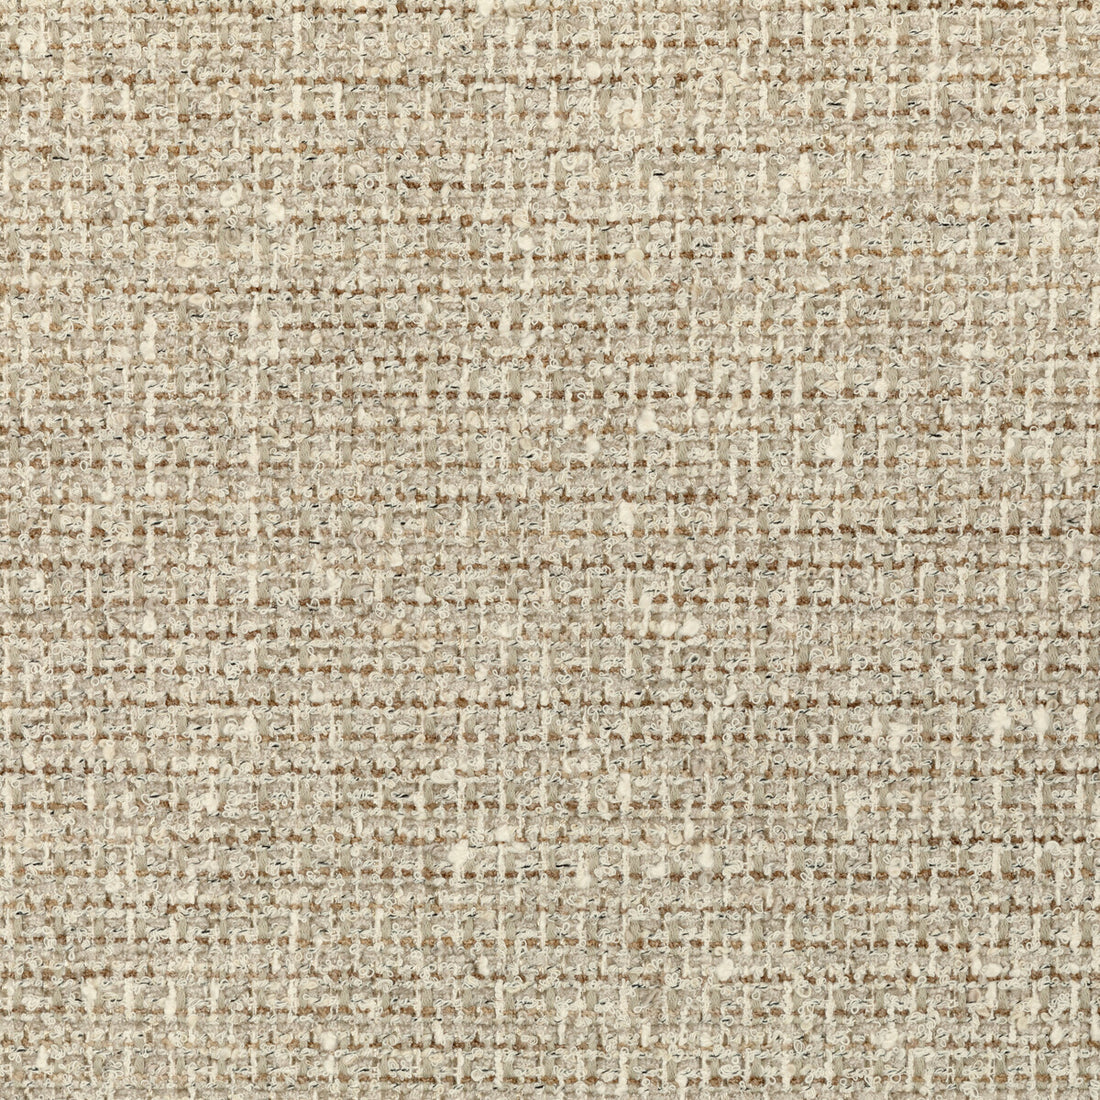 Atelier Tweed fabric in camel color - pattern 36101.166.0 - by Kravet Couture in the Luxury Textures II collection